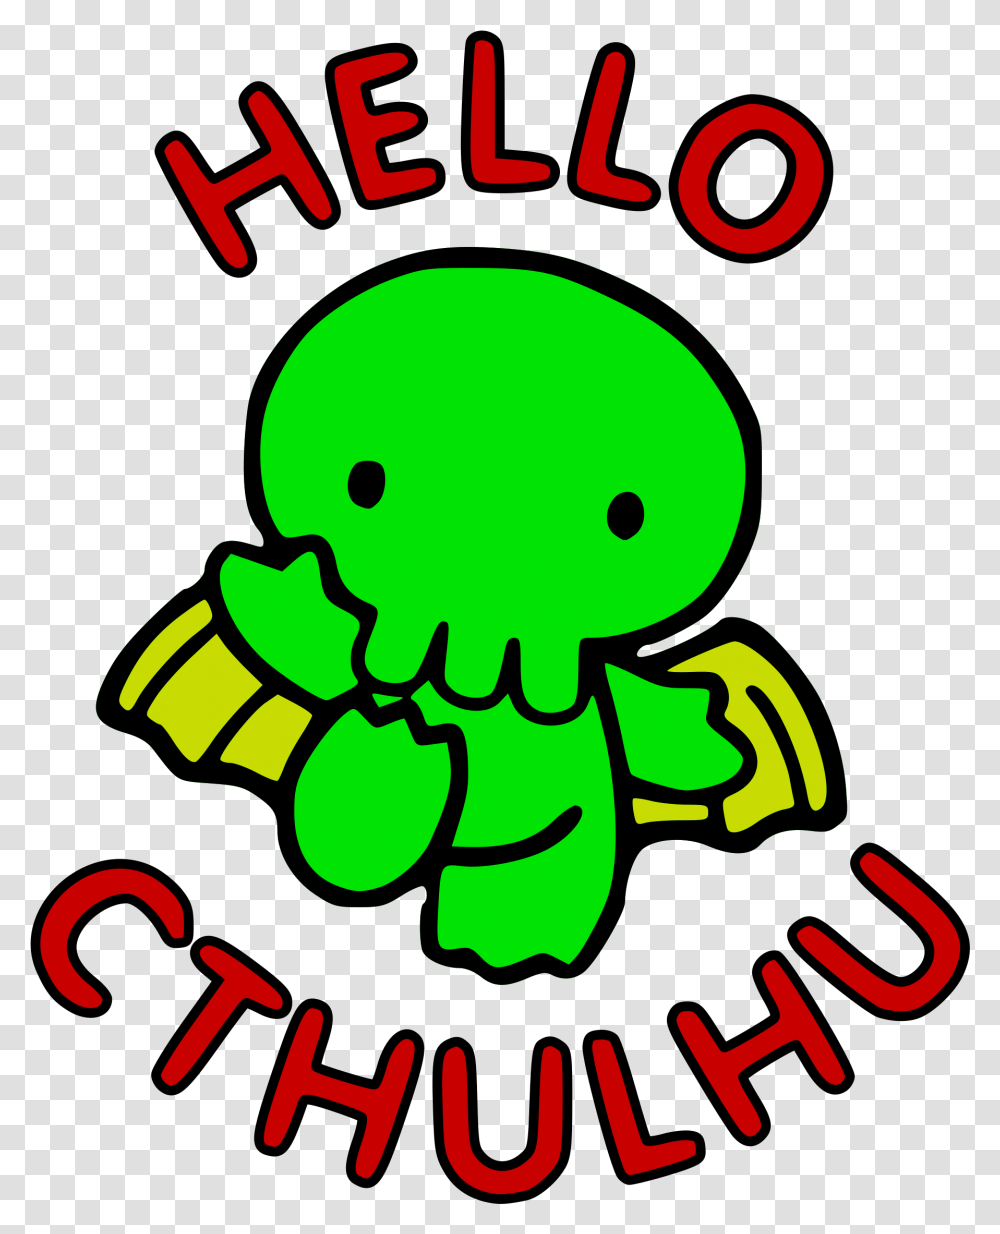 This Free Icons Design Of Hello Cthulhu Hello Cthulhu, Poster, Advertisement Transparent Png